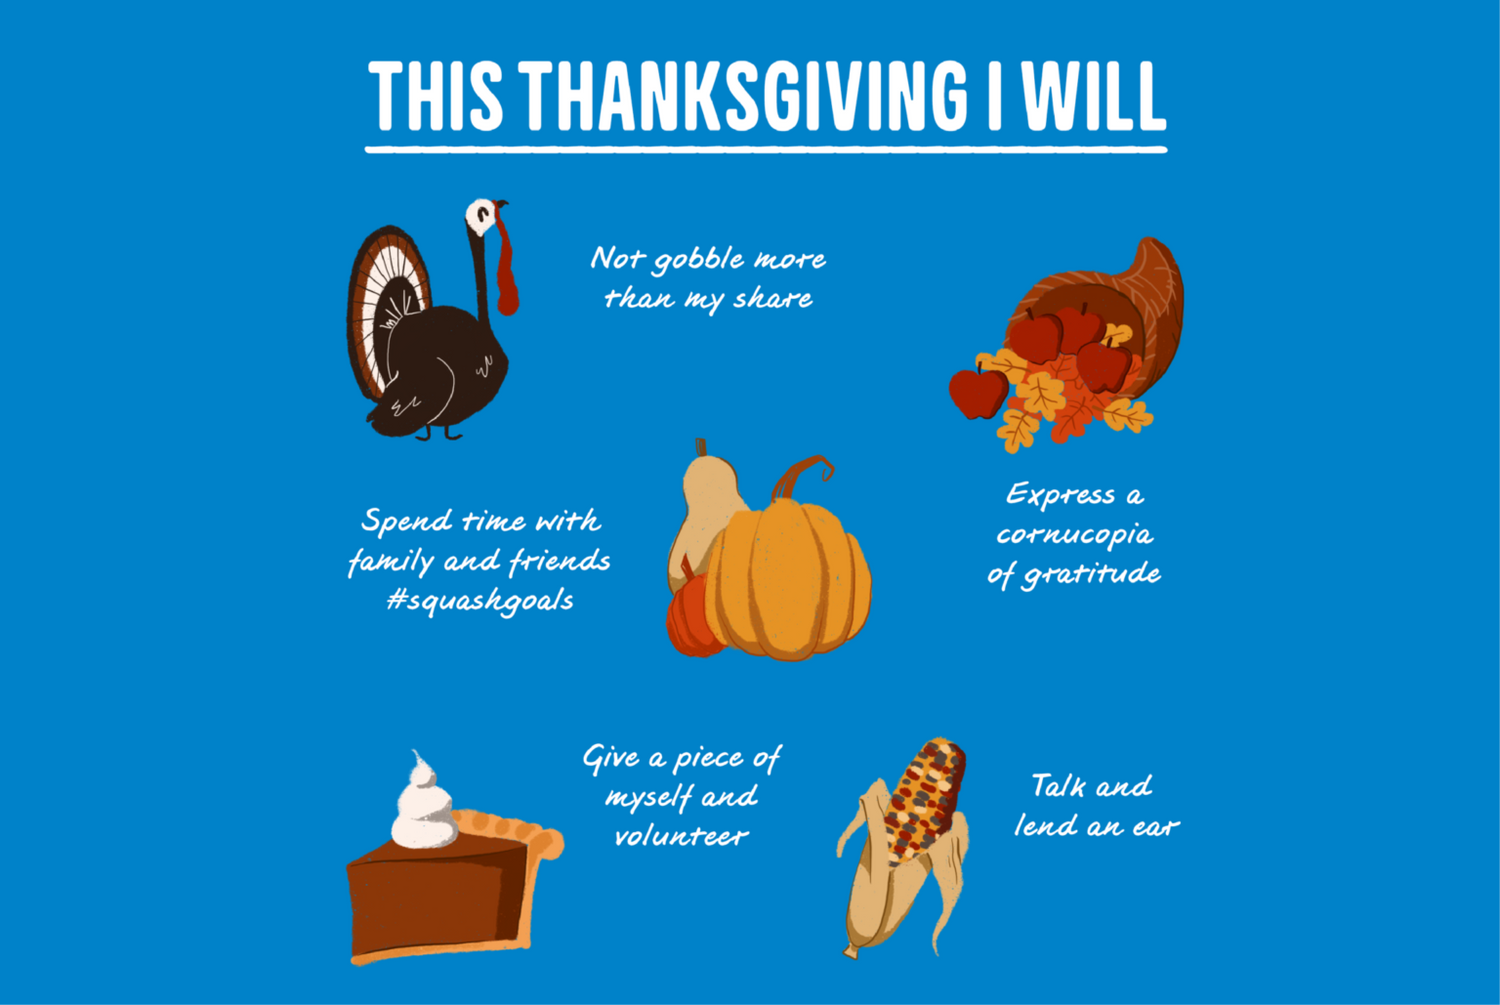 How to express gratitude and enjoy this Thanksgiving even more